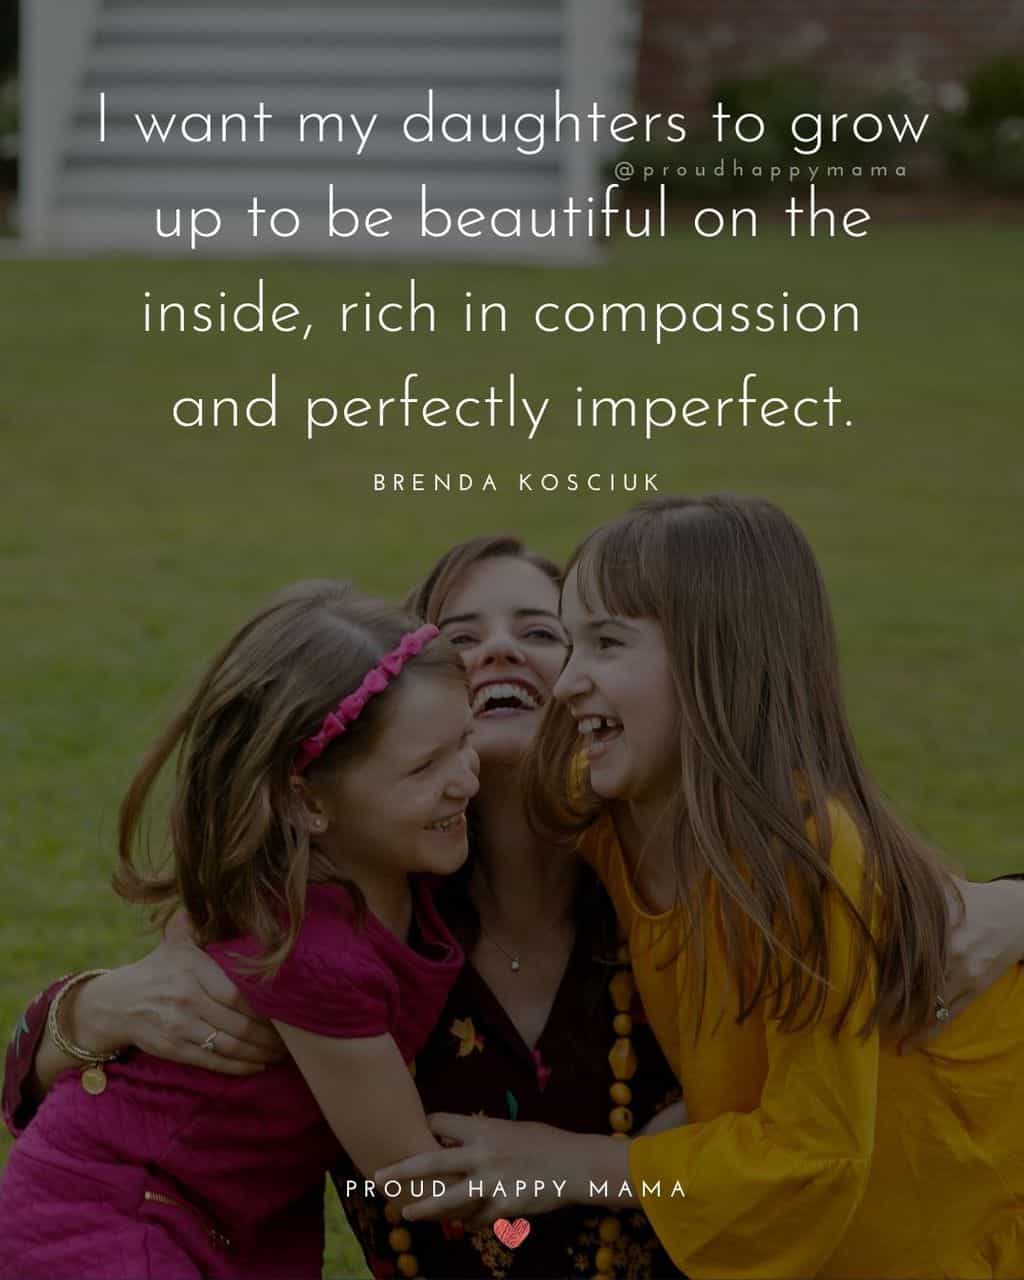 quotes about daughters love - ‘I want my daughters to grow up to be beautiful on the inside, rich in compassion and perfectly imperfect.’ – Brenda